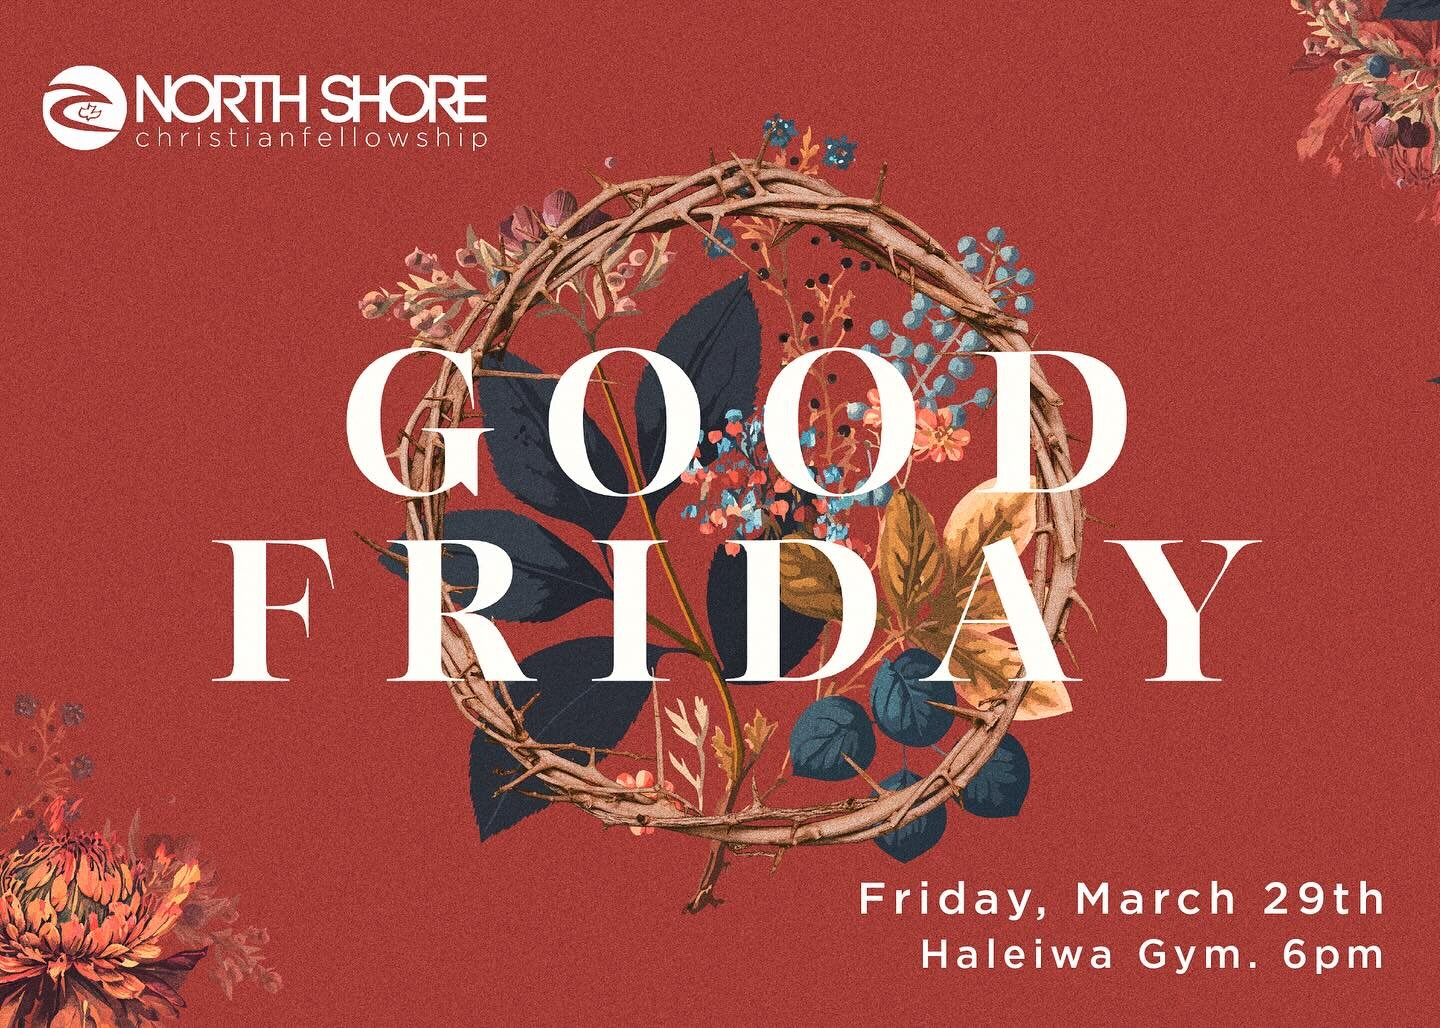 Our Easter weekend services begin this Friday night! Join us March 29th on the Haleiwa Gym Lawn at 6pm for our Good Friday service that will include a time of communion. Childcare will be available across the street!

Then we&rsquo;ll see you again S